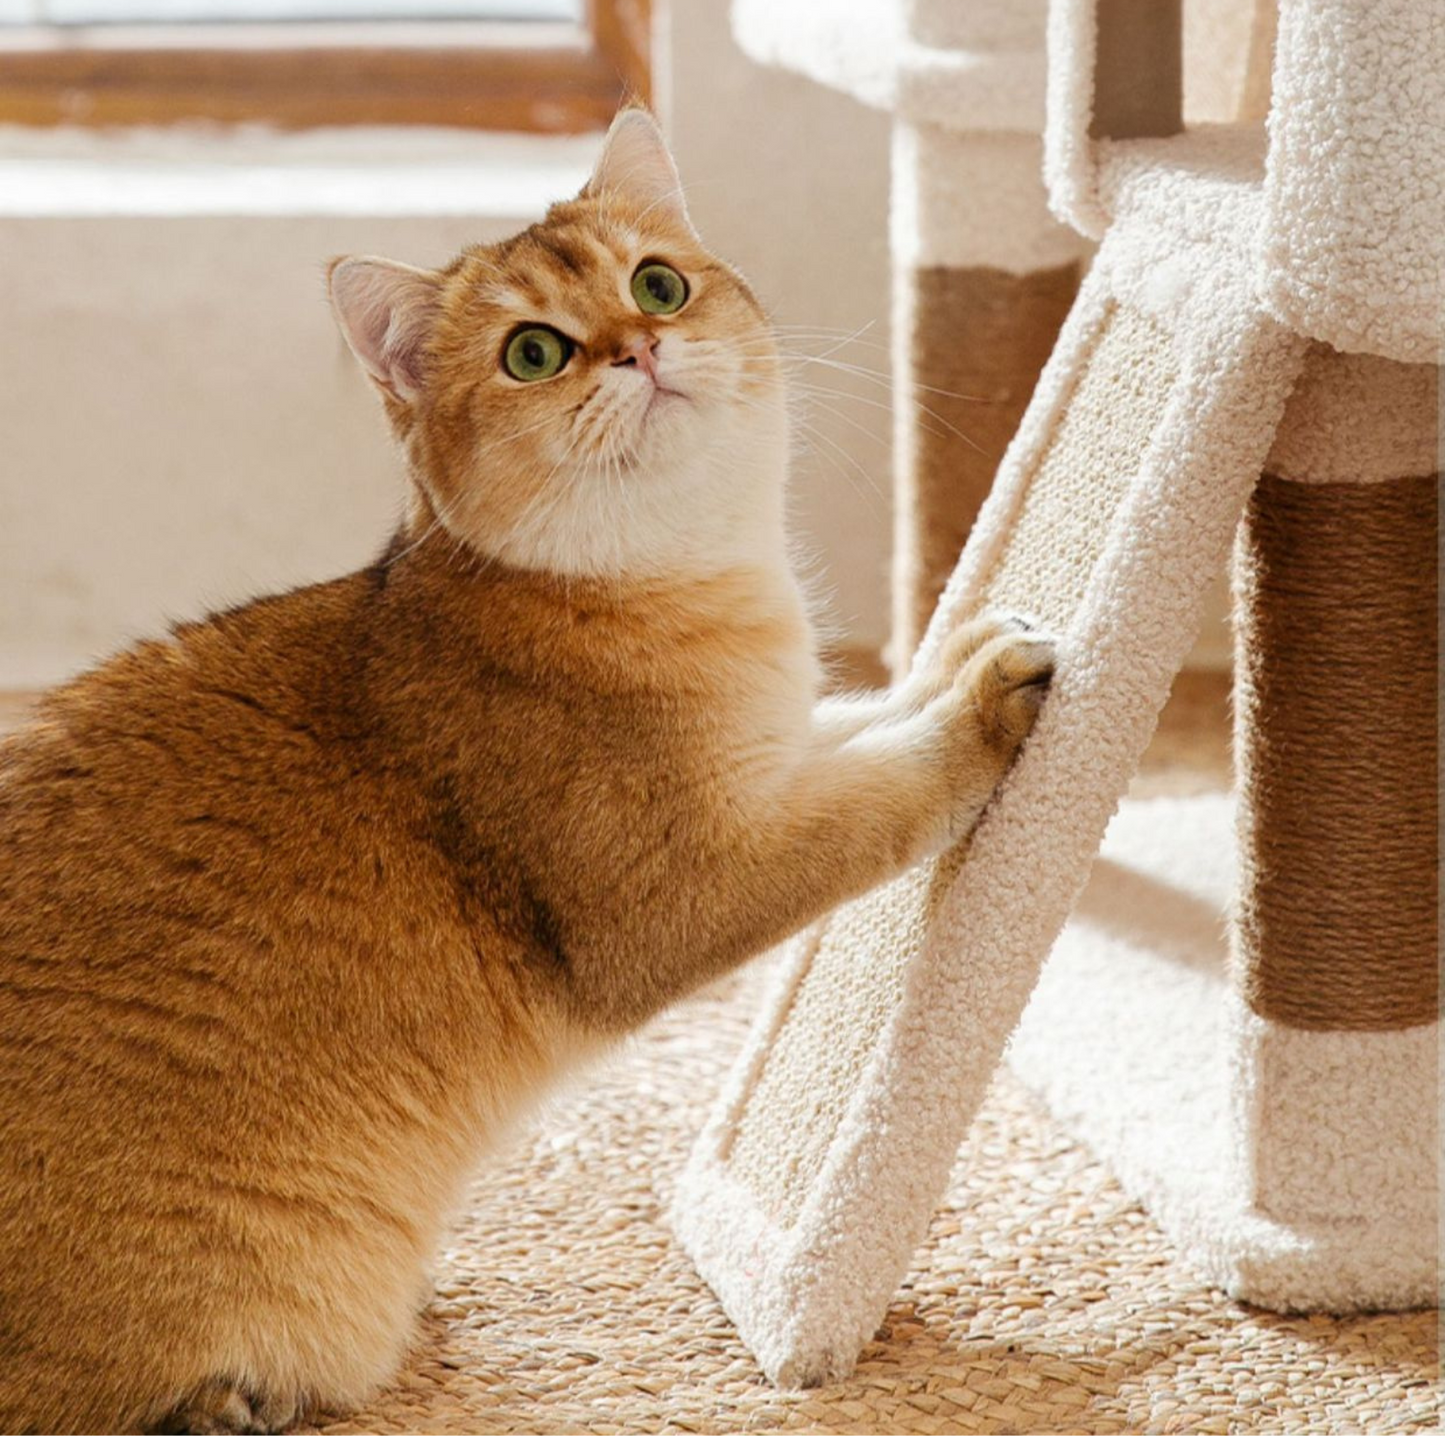 Ona's Cottage Multi-Tier Cat Tree with Cat Scratching Posts